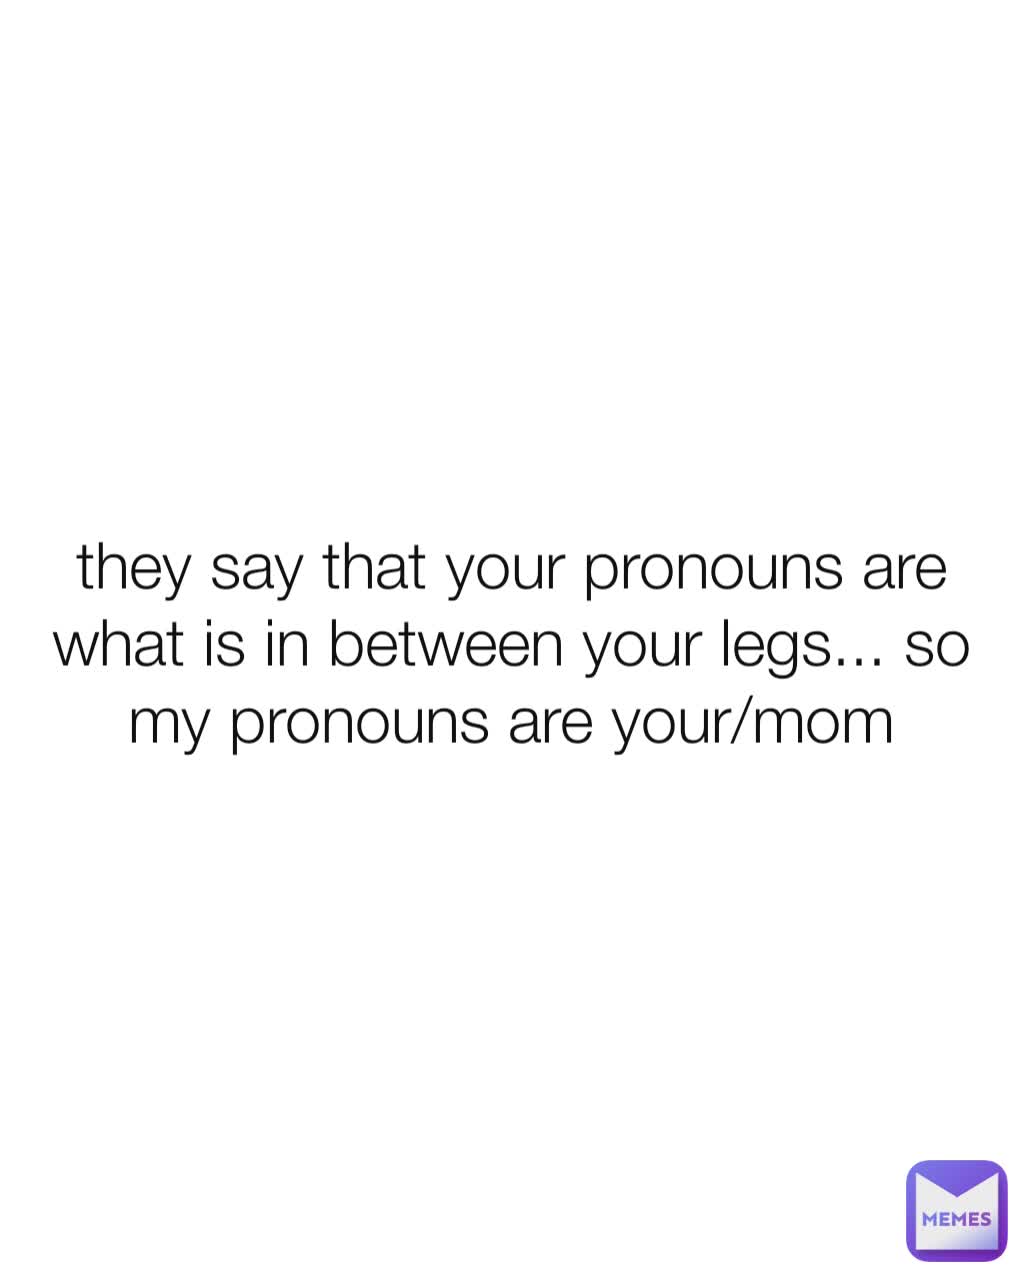 they say that your pronouns are what is in between your legs... so my pronouns are your/mom